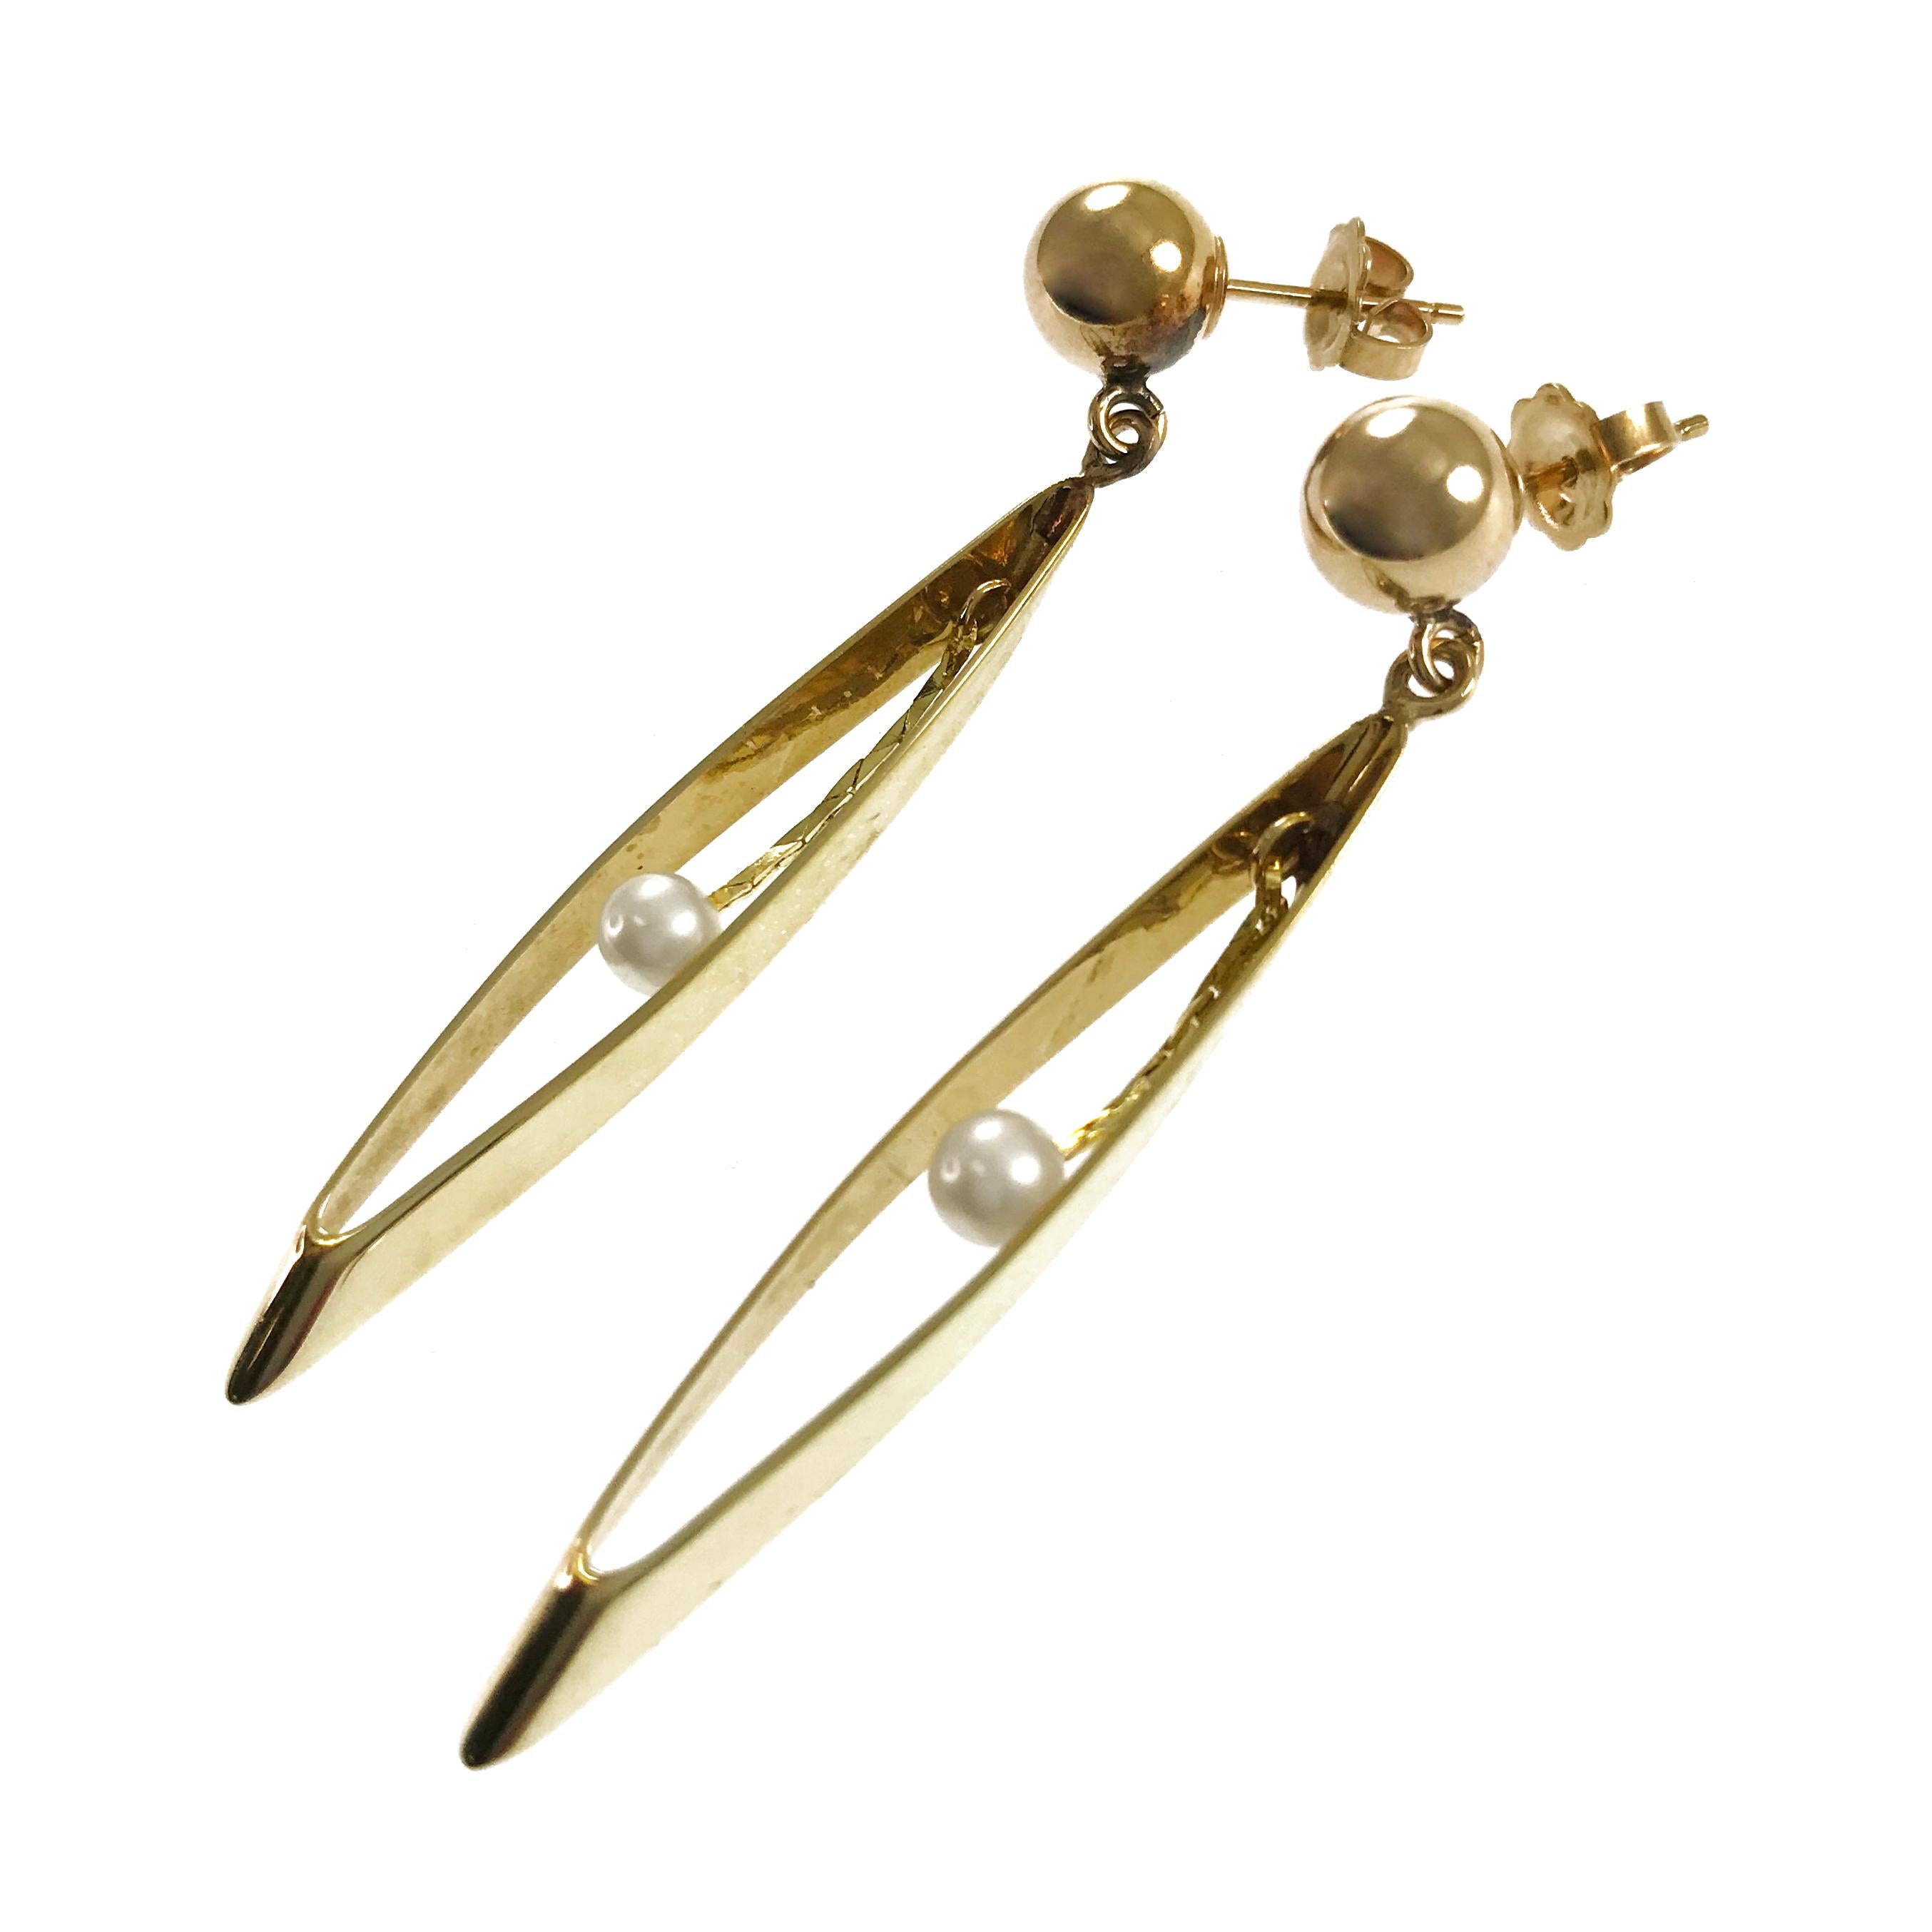 Oval Vertical Hoop Pearl Drop Earrings. These earrings contain a round gold bead stud with a slender oval hoop with a cobra chain that drops mid-way on the hoop with a Pearl at the end. The Pearls measure 4.25mm each. The earrings measure 54mm high